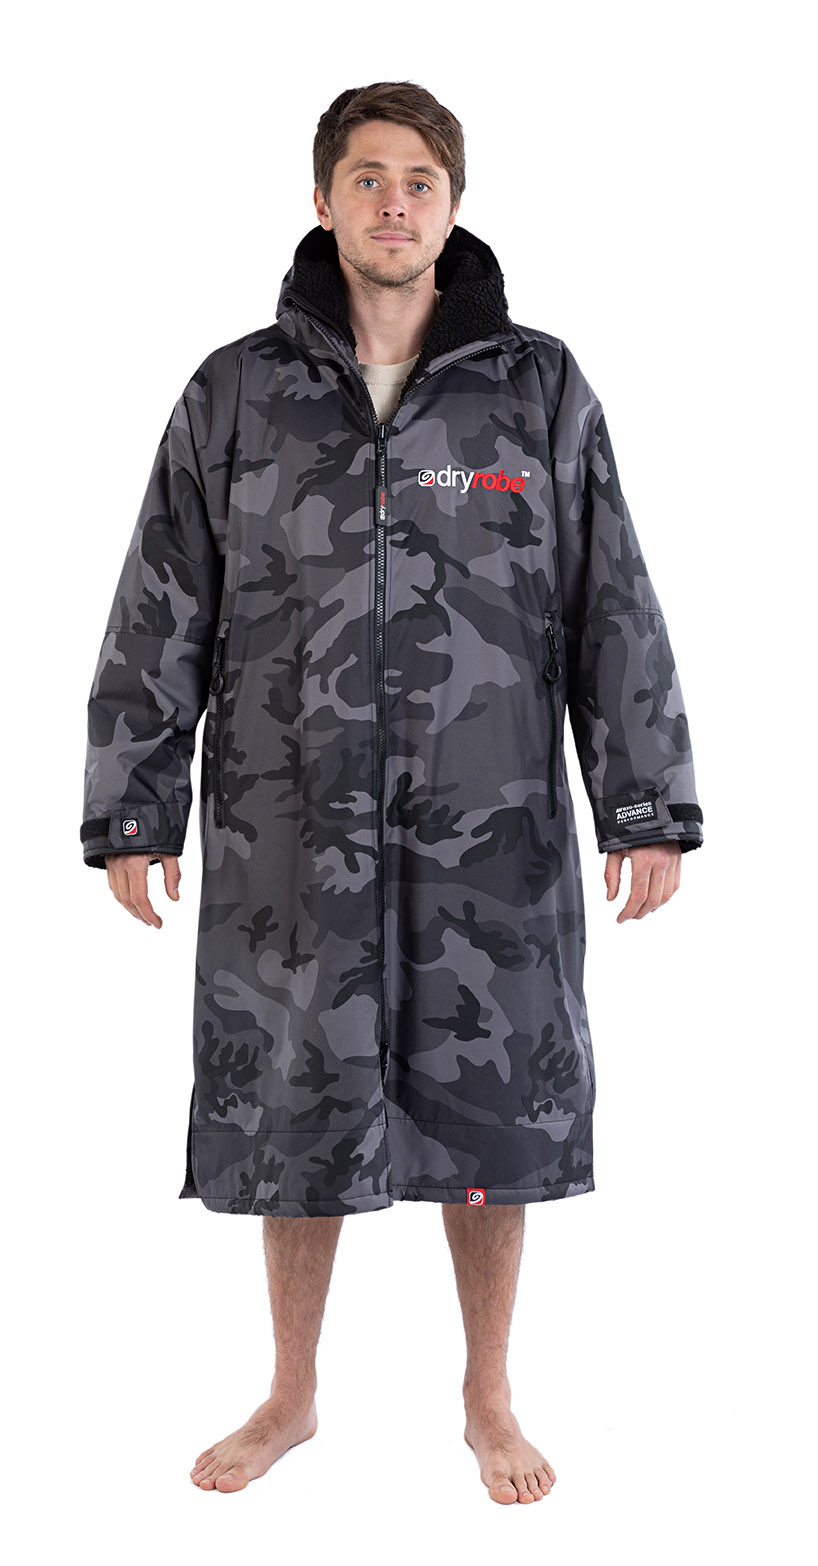 Details about   Open water sea swimming Starter pack Dryrobe Squall changing dry robe 